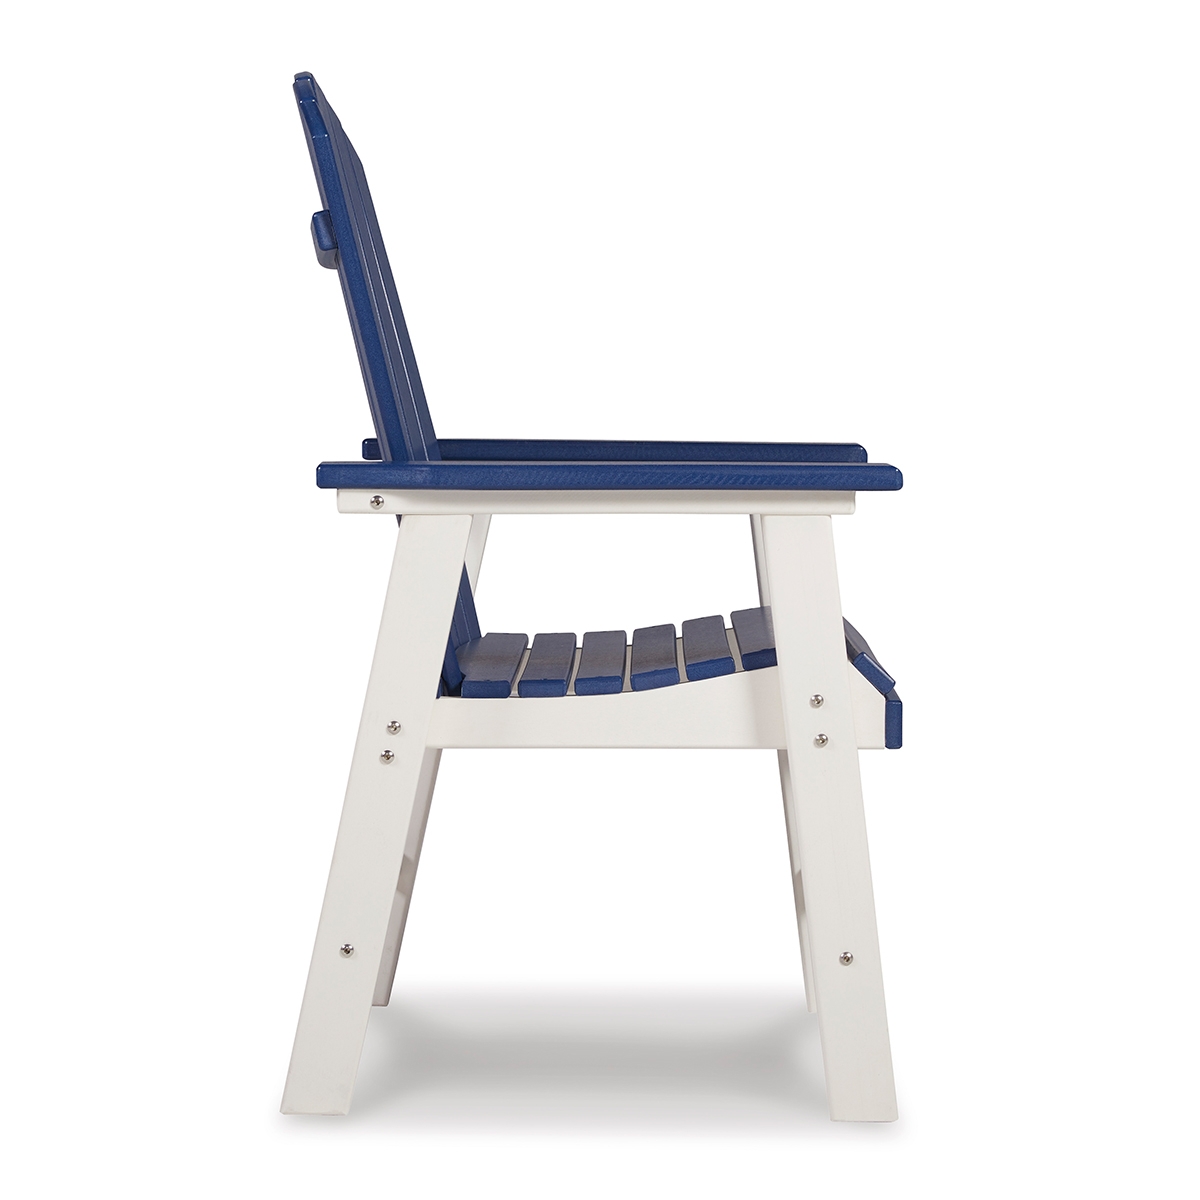 Picture of DAYTONA NVY/WHT ARM CHAIR PAIR